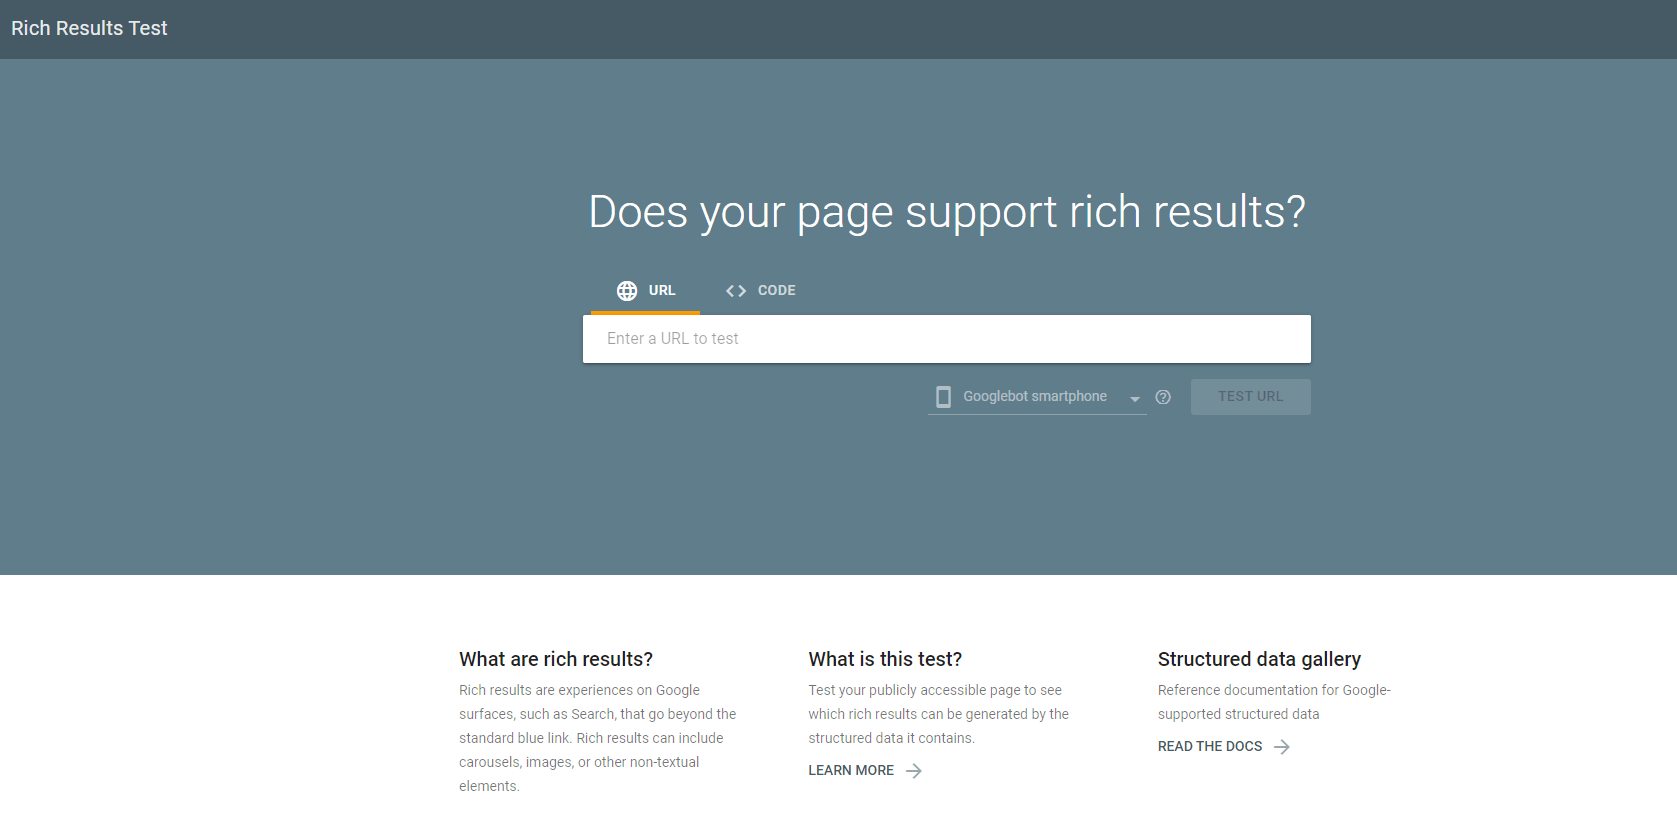 Google’s Rich Results Test